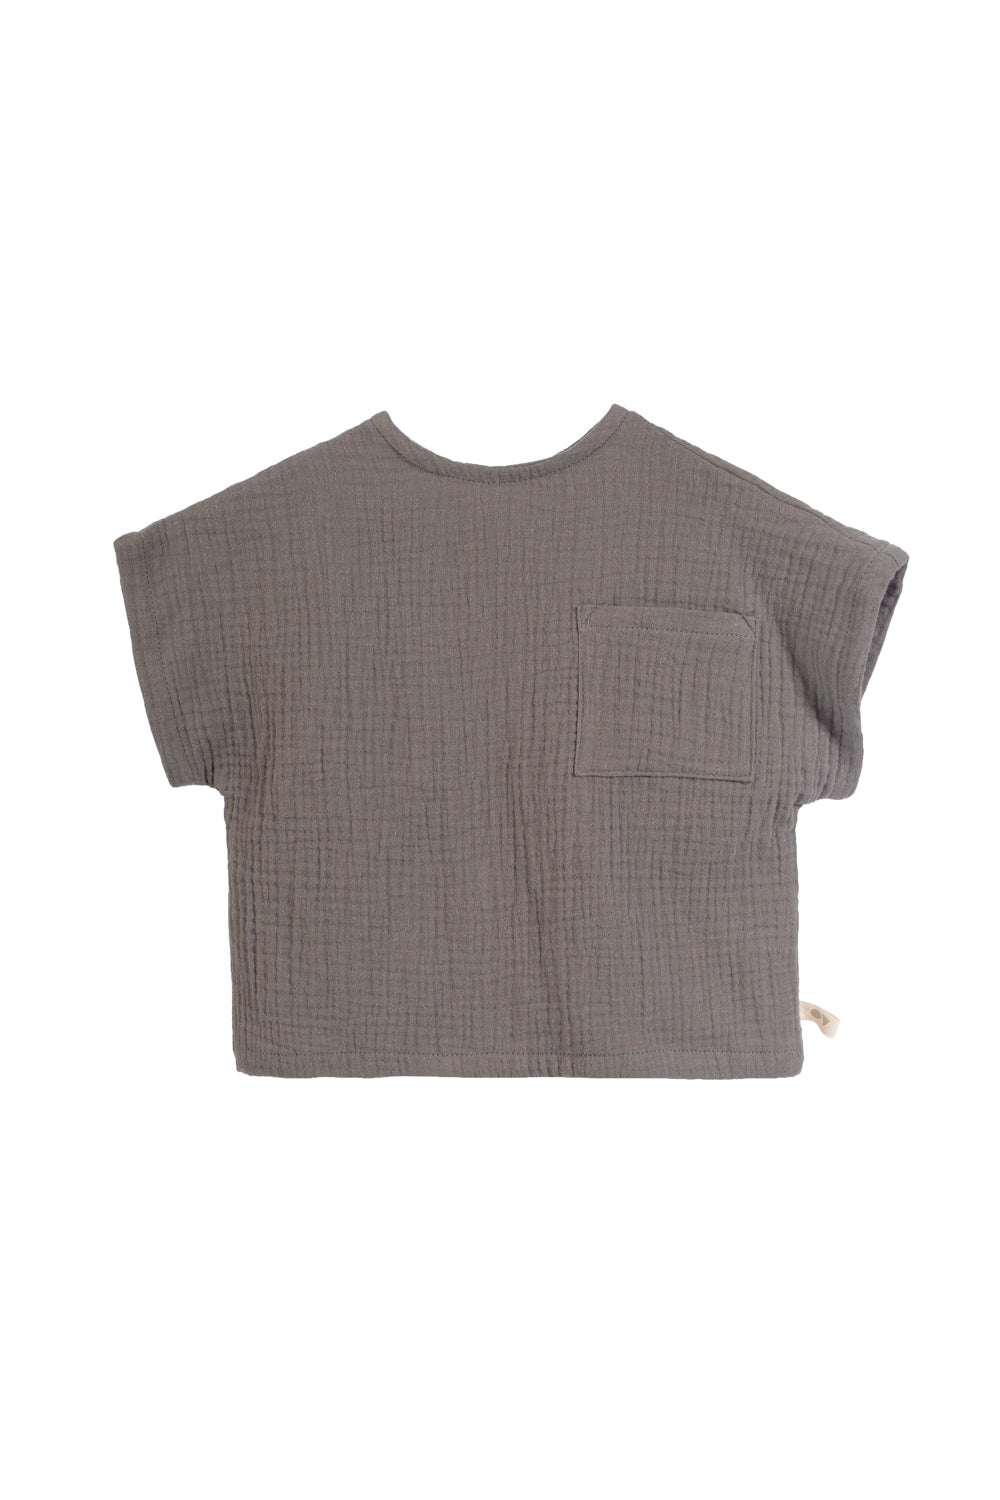 forest | gray t-shirt